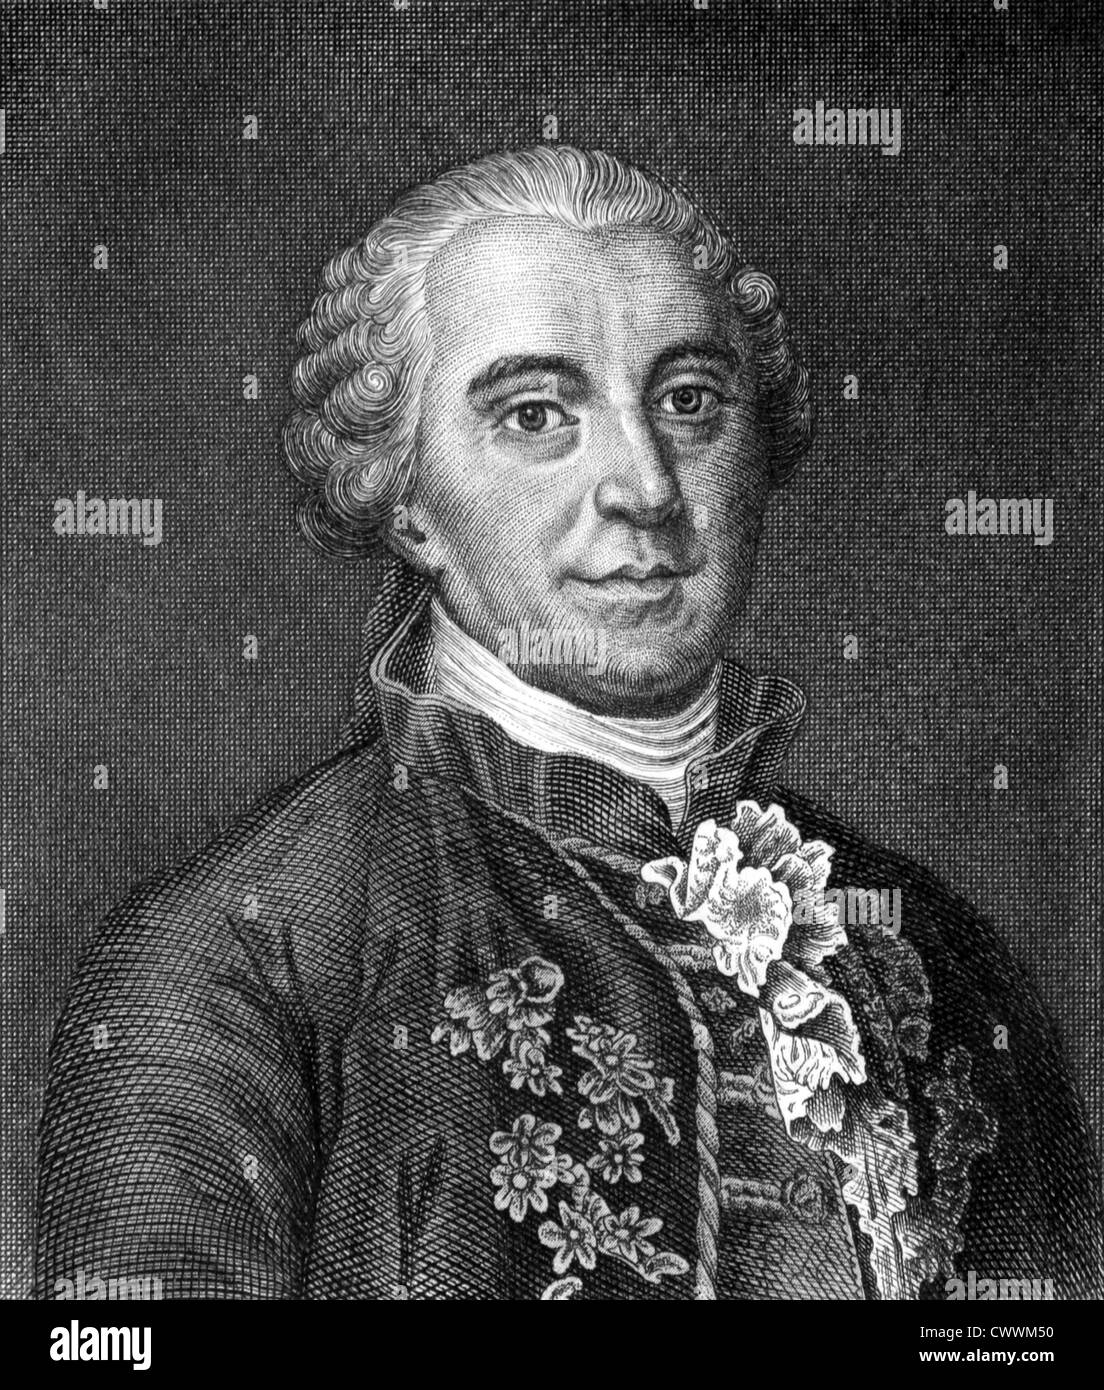 Georges-Louis Leclerc, Comte de Buffon (1707-1788) on engraving from 1859. French naturalist,mathematician,cosmologist & author. Stock Photo